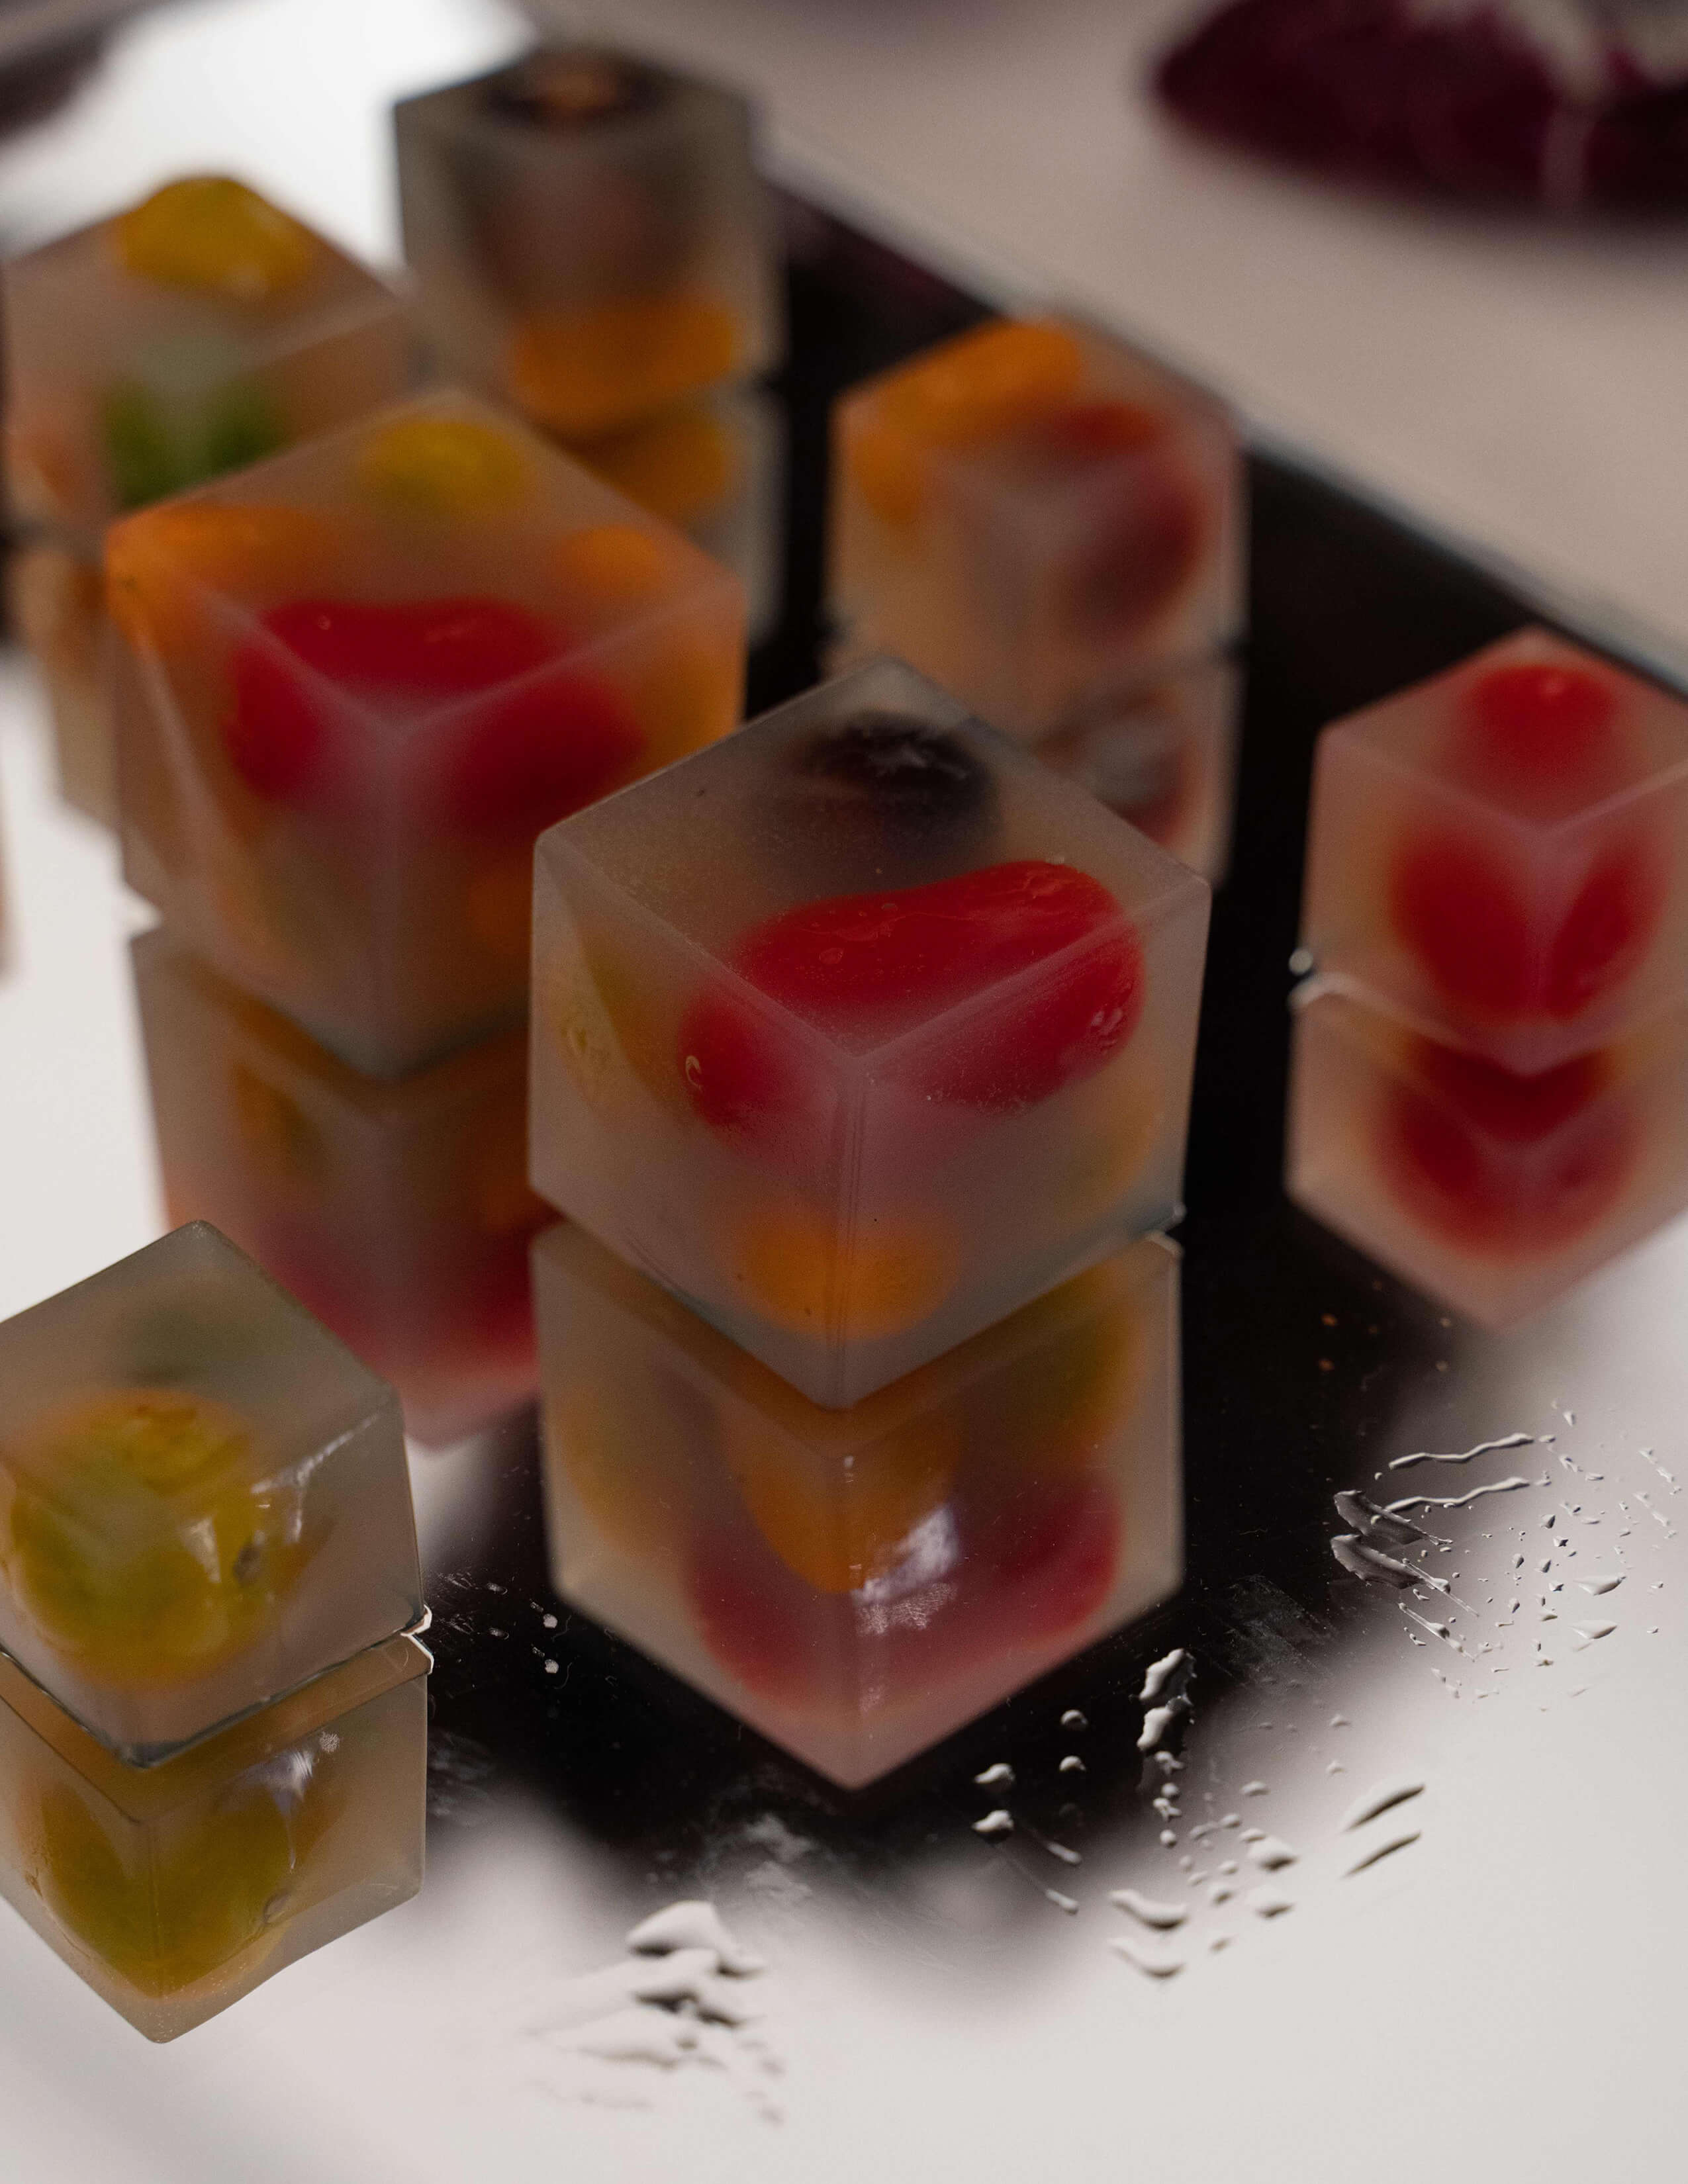 A closer look at jelly cubes served on glass board photographs.